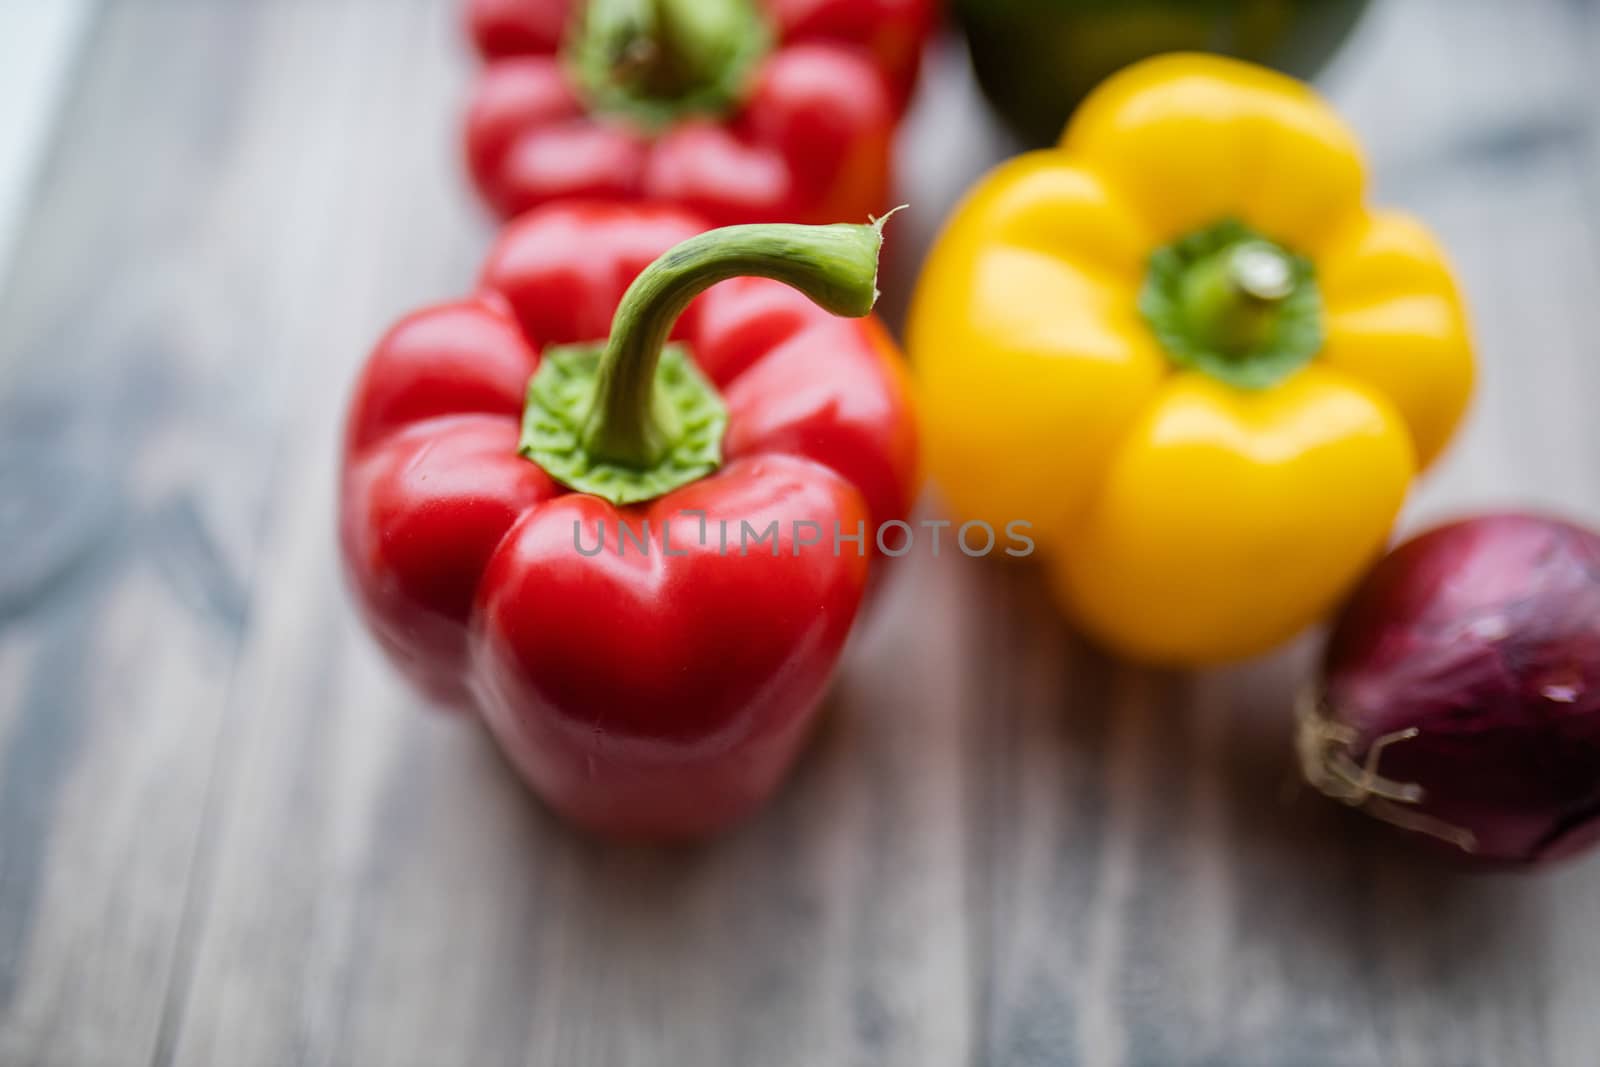 Red and yellow bell peppers and a purple onion up close on a wooden table. Fresh and colorful vegetables on table.Vegan meal ingredients